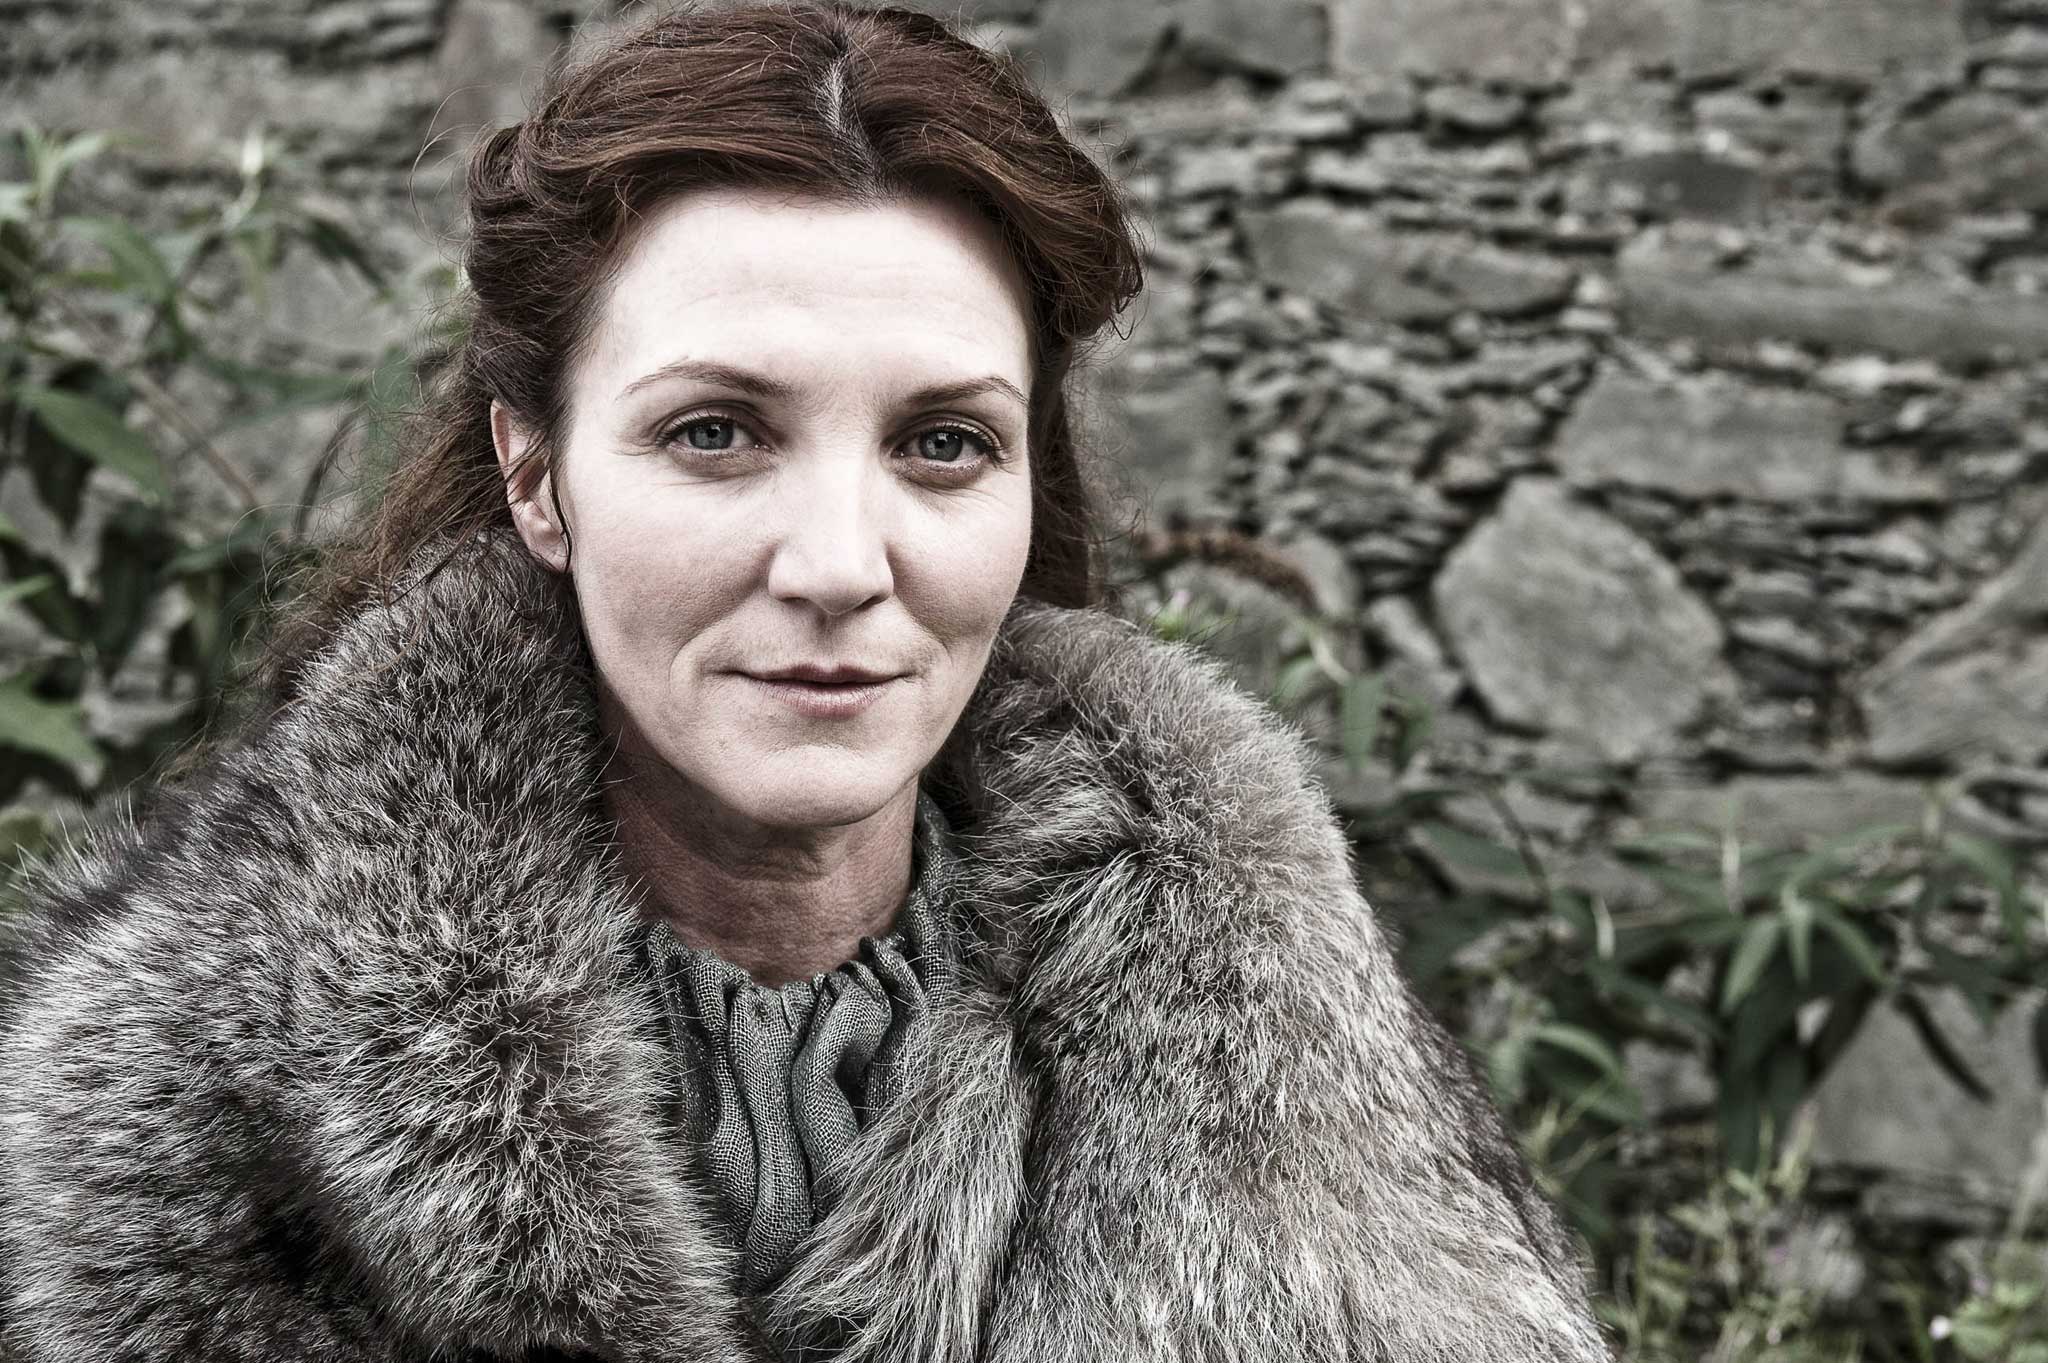 On 'Game of Thrones': 'Of course I'm going to like Lady Catelyn Stark'